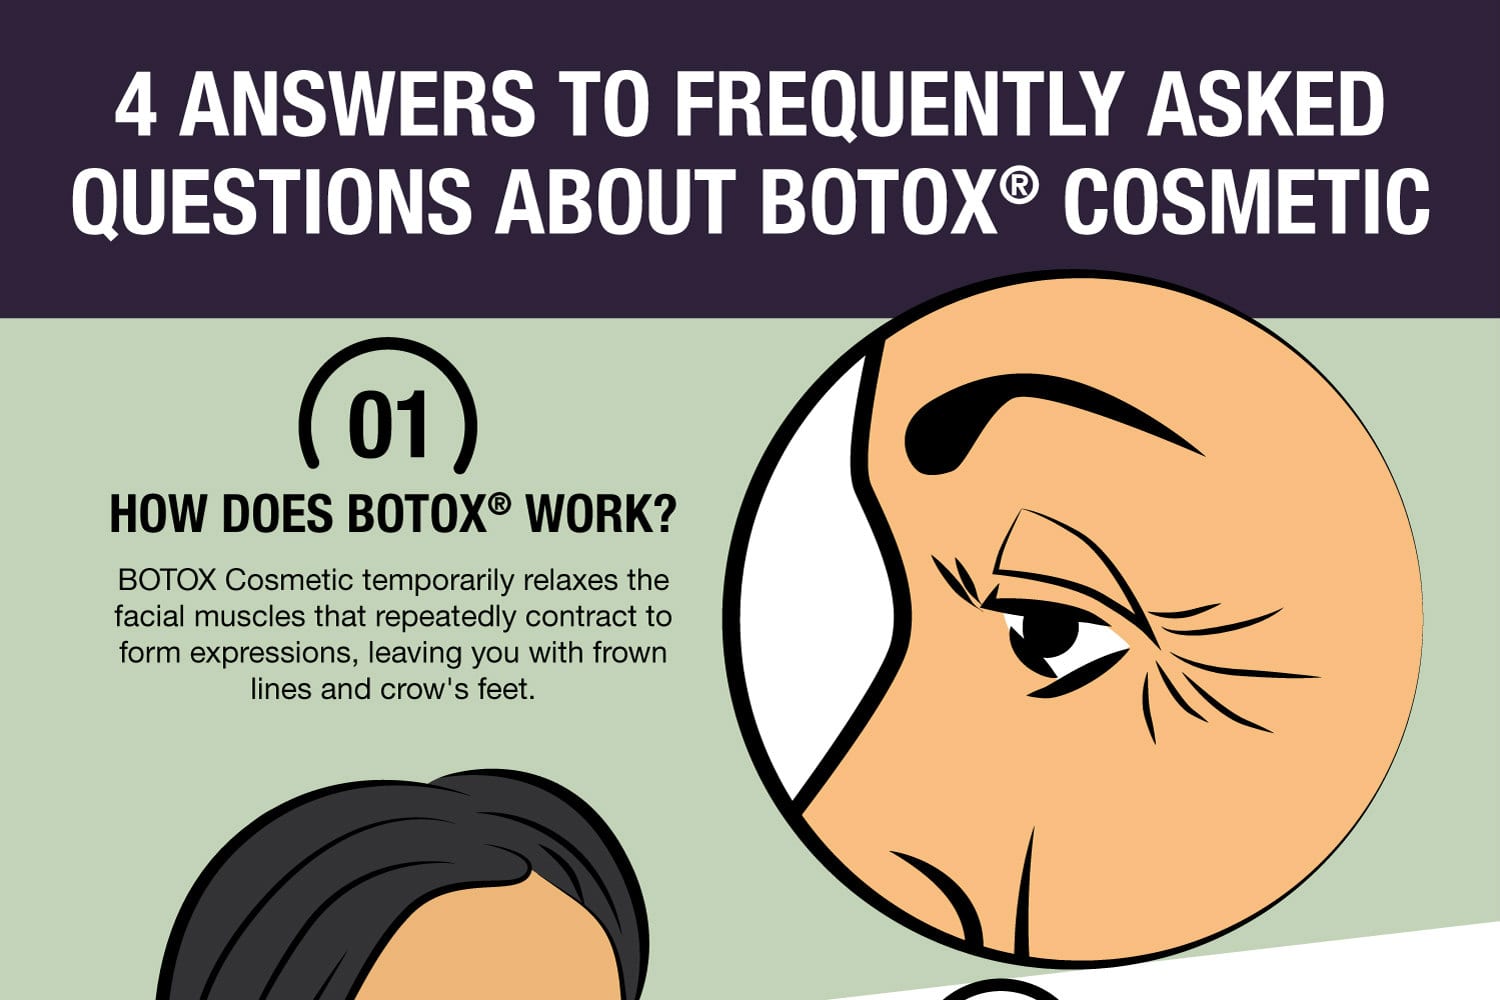 4 Answers to Frequently Asked Questions about BOTOX Cosmetic [Infographic]